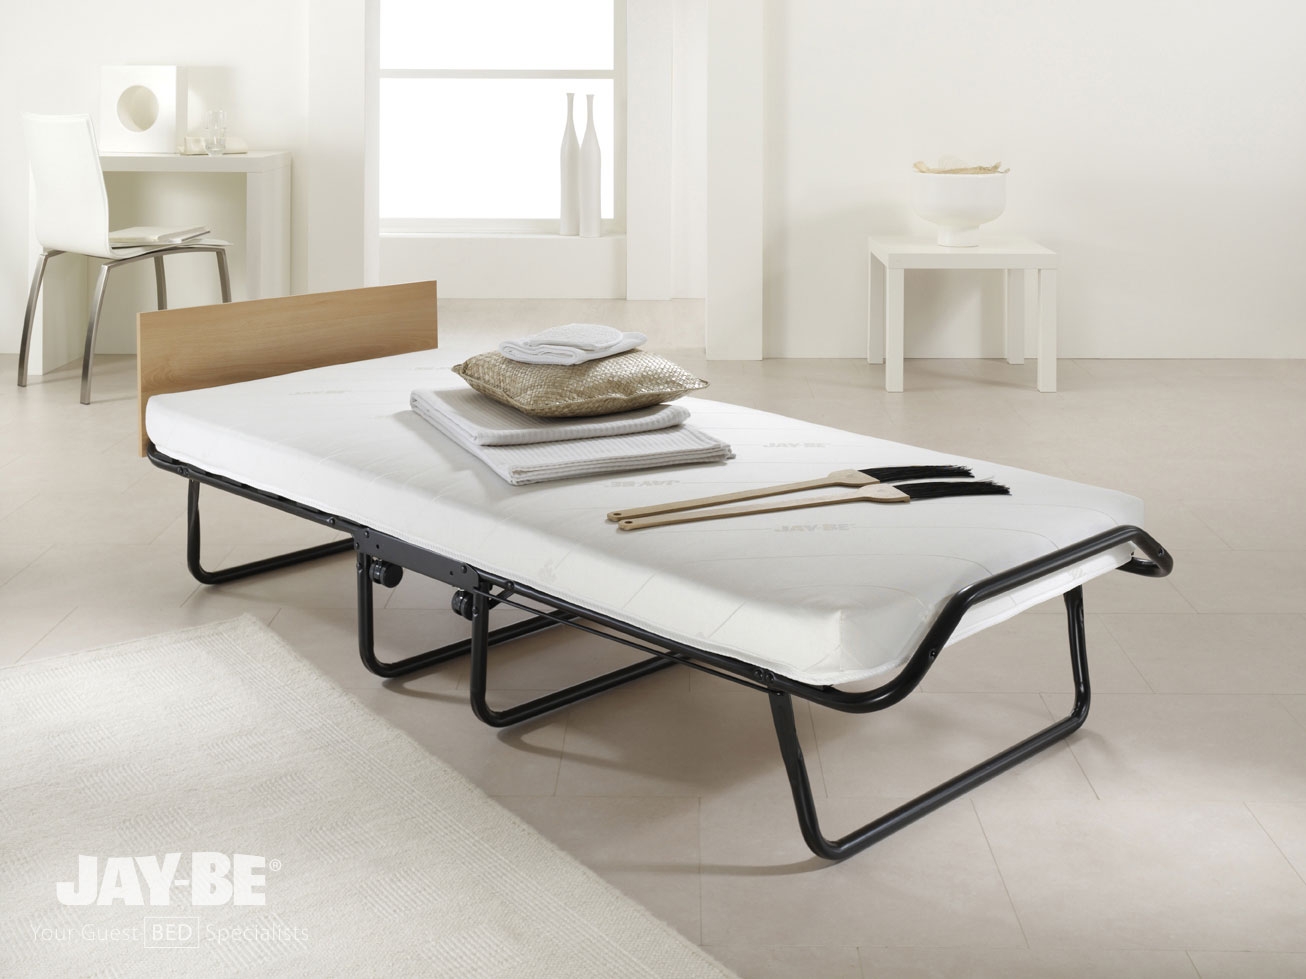 Jay-Be Kingston Single Folding Bed with optional